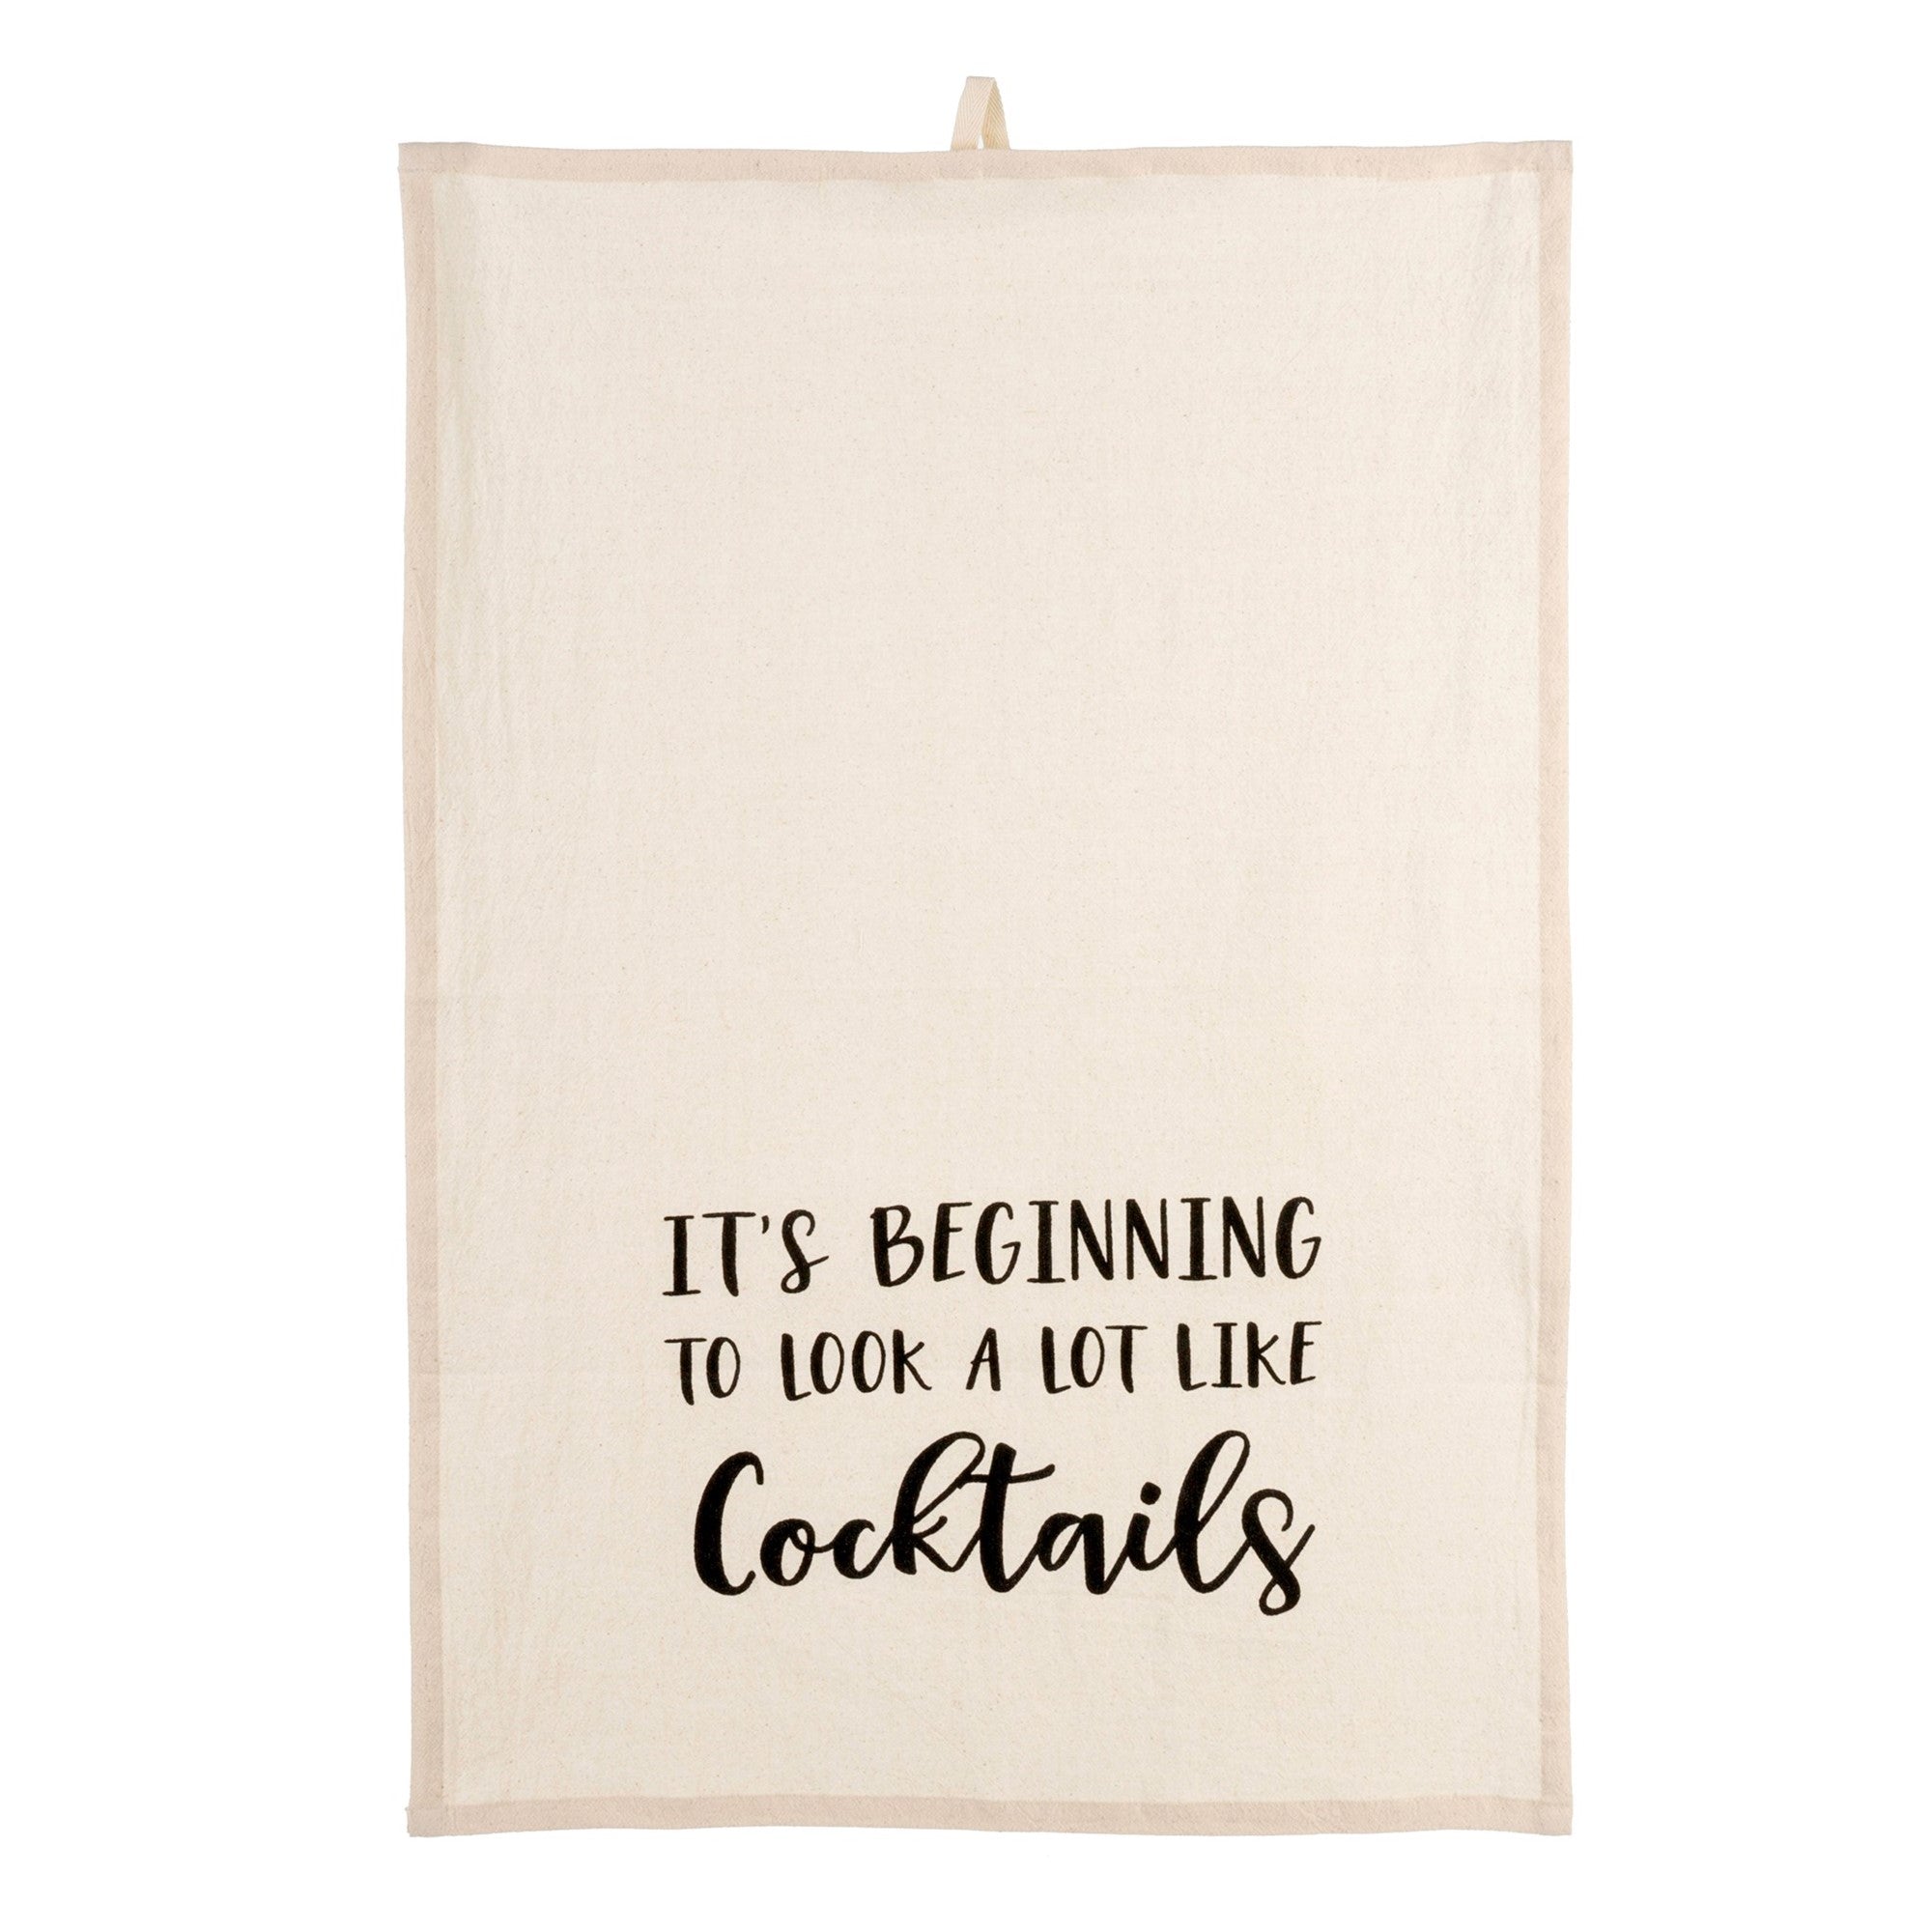  "It's beginning to look a lot like Cocktails" Tea Towel, IT-Indaba Trading, Putti Fine Furnishings